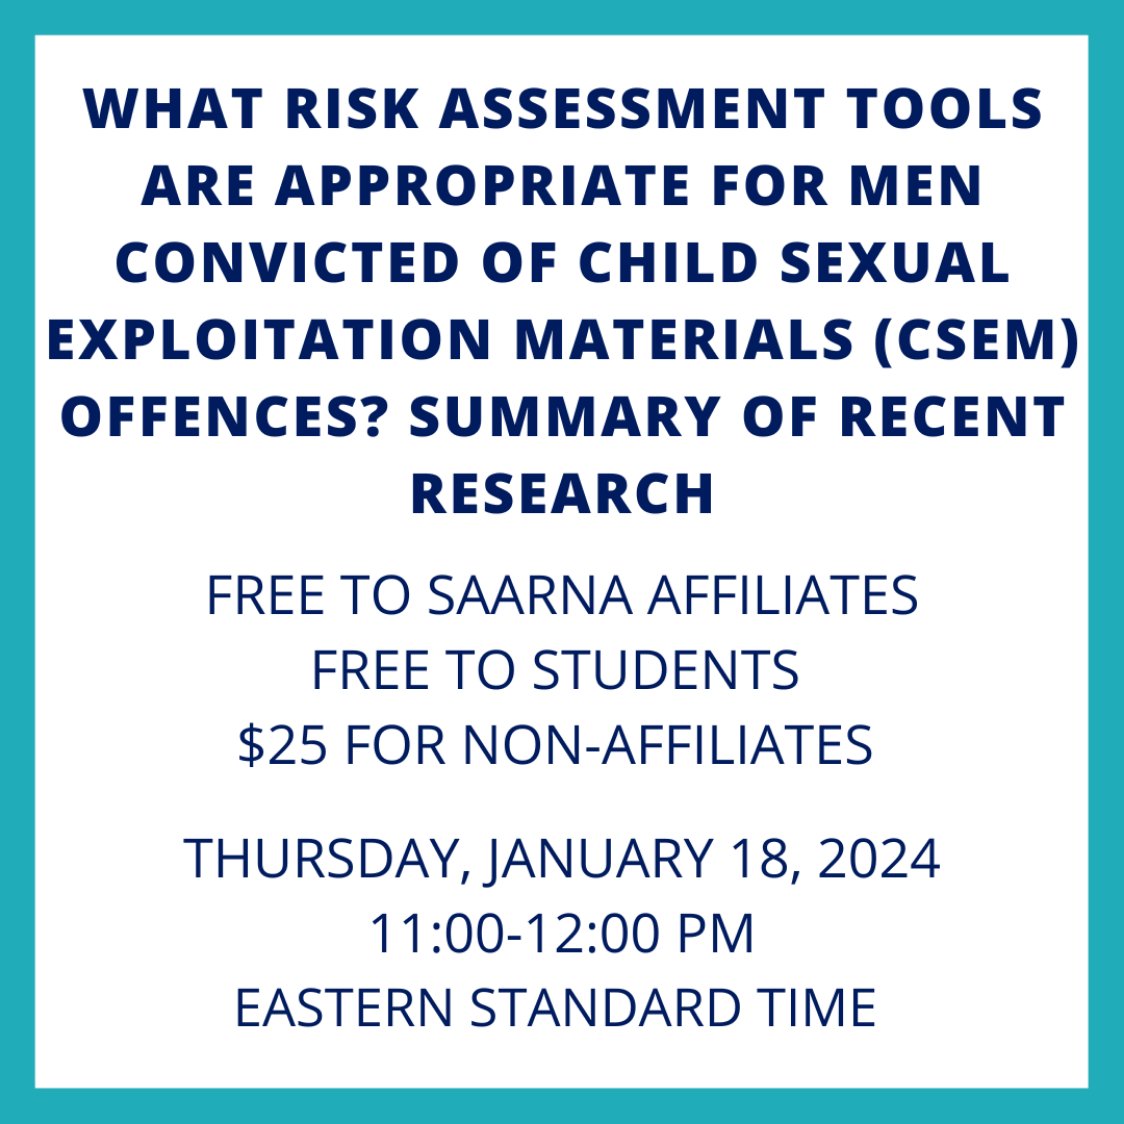 A presentation is coming up in two weeks to recommend and review the latest research on risk assessment scales (specifically, the CPORT, Risk Matrix 2000, STABLE/ACUTE-2007, and Static-99R) with men convicted of CSEM offences. 

Sign up here >  saarna.org/product/what-r…